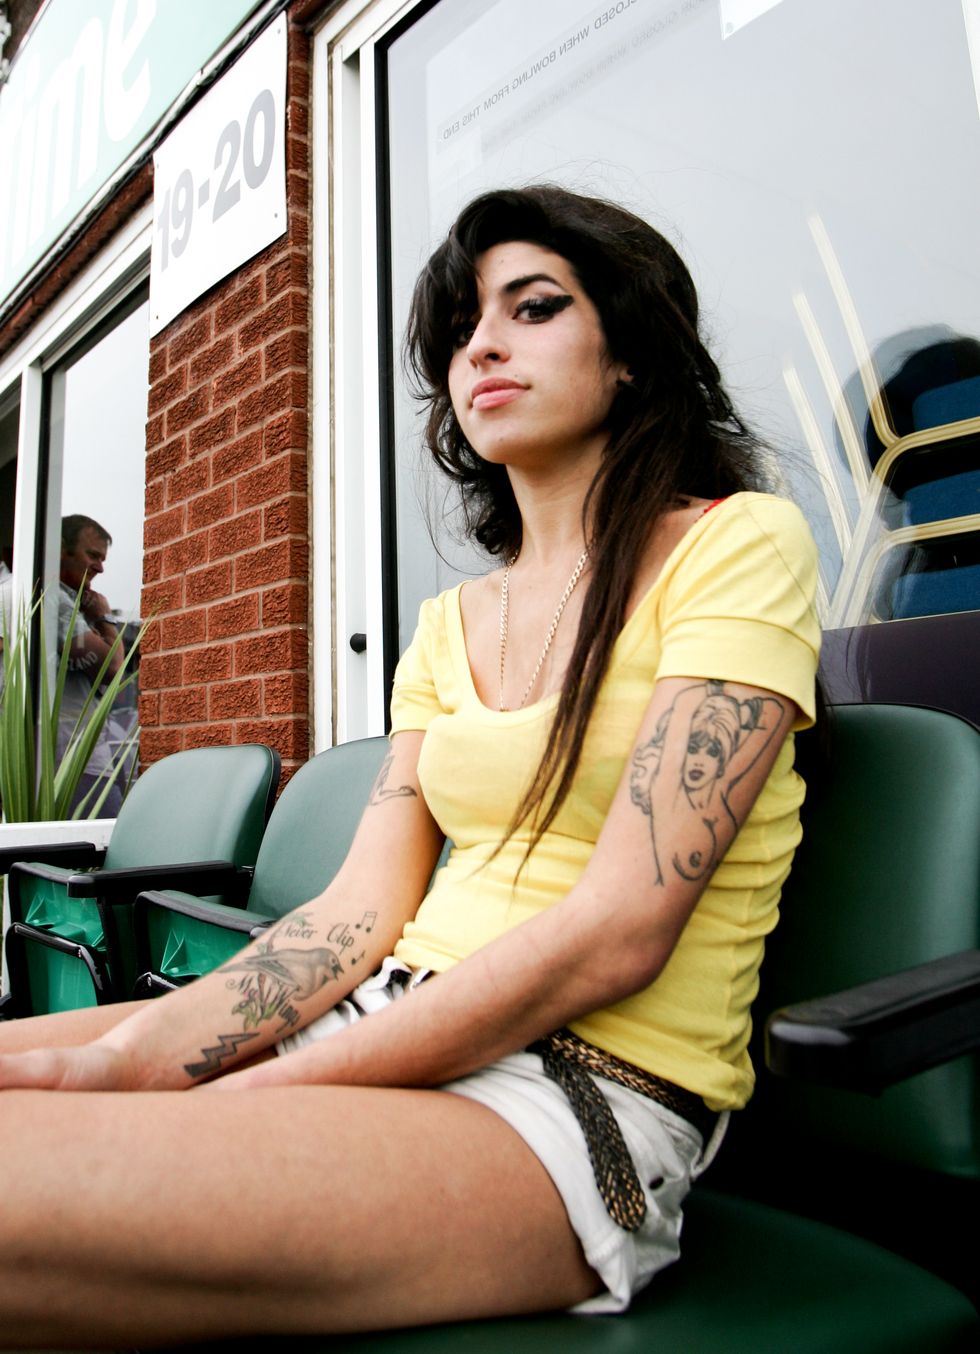 pop singer amy winehouse portrait session at old trafford cricket ground in manchester, 2007 photo by andy willsherredferns